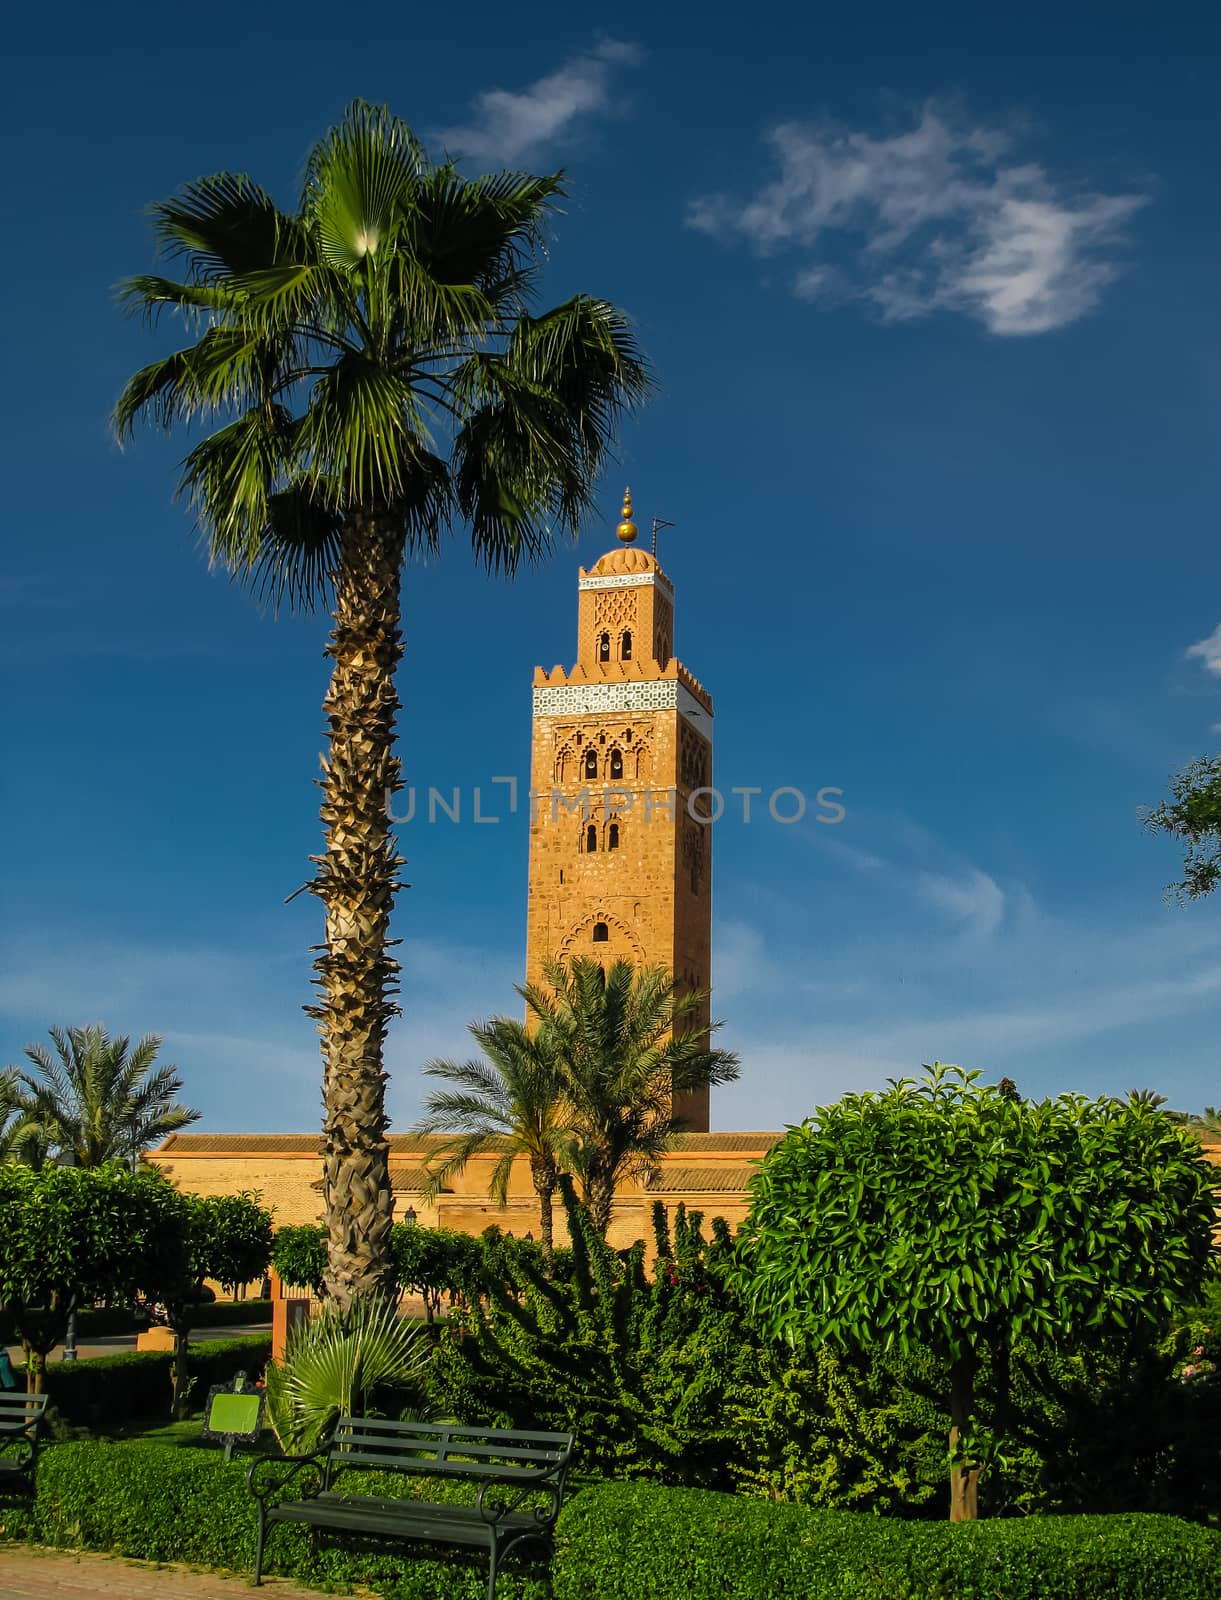 Exterior view to Koutoubia mosque aka Mosque of the Booksellers in Marrakesh, Morocco by homocosmicos